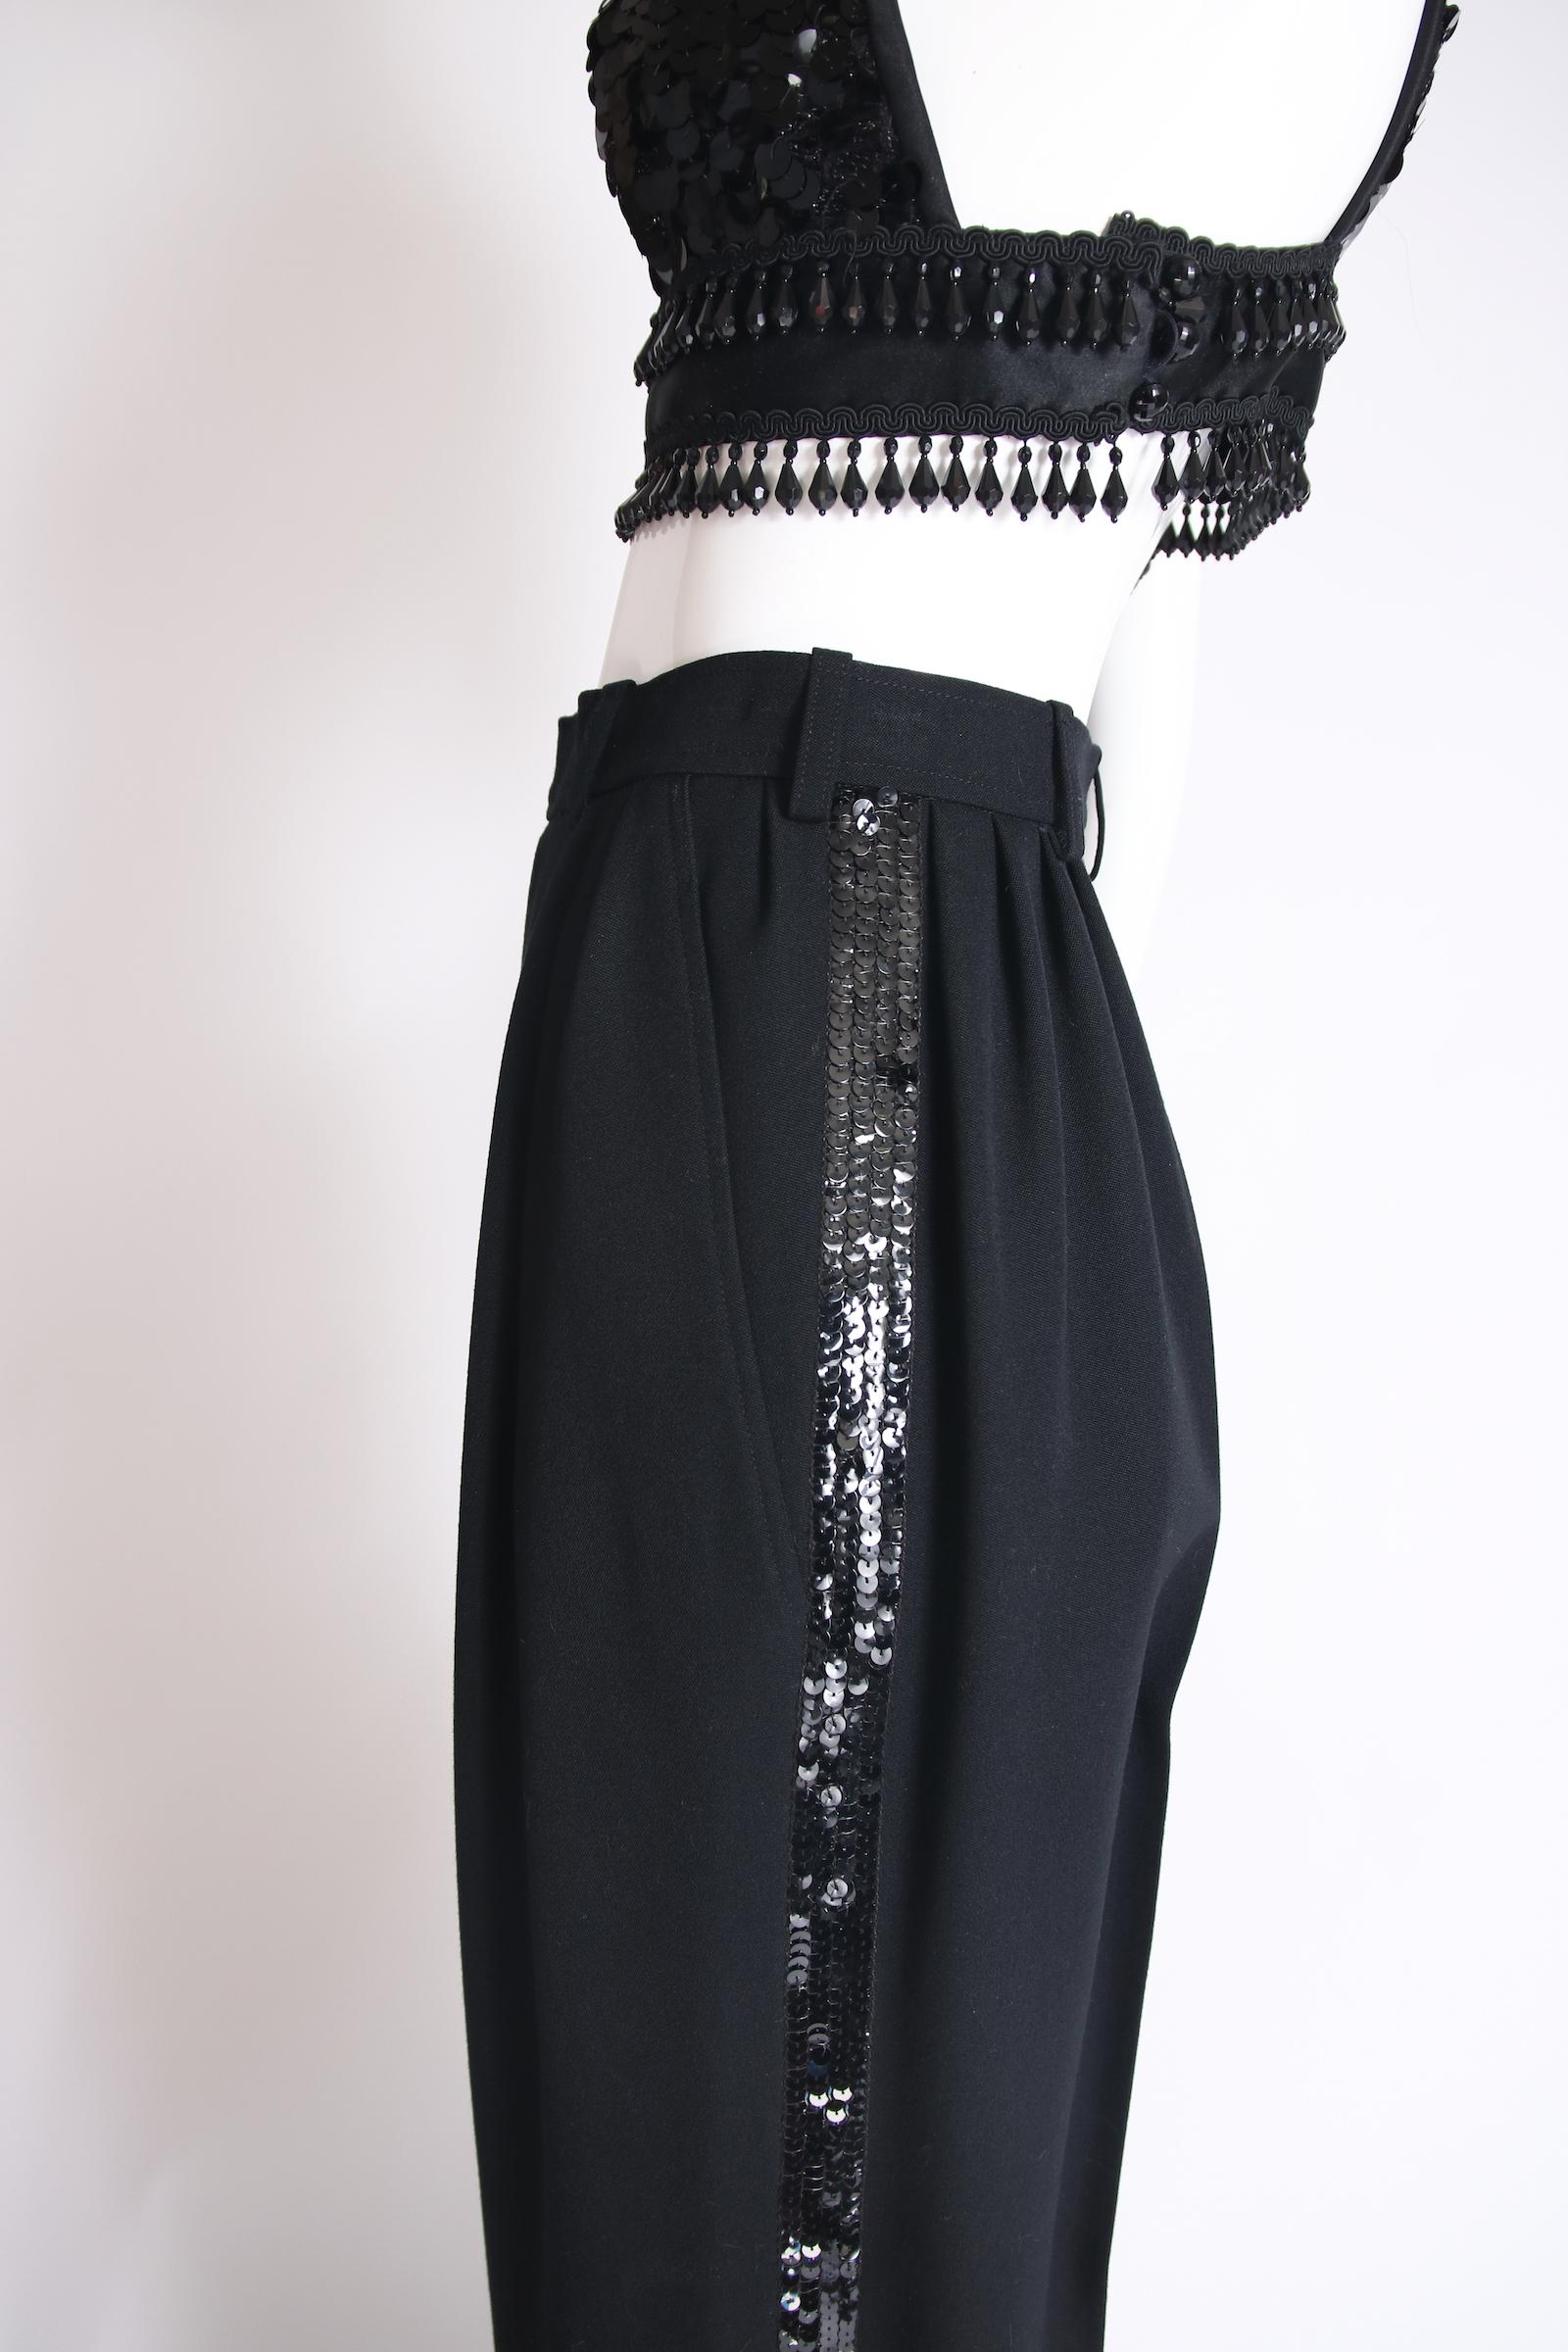 Yves Saint Laurent Black Smoking Tuxedo Pants w/Sequin Side Stripe 1970's In Excellent Condition For Sale In Studio City, CA